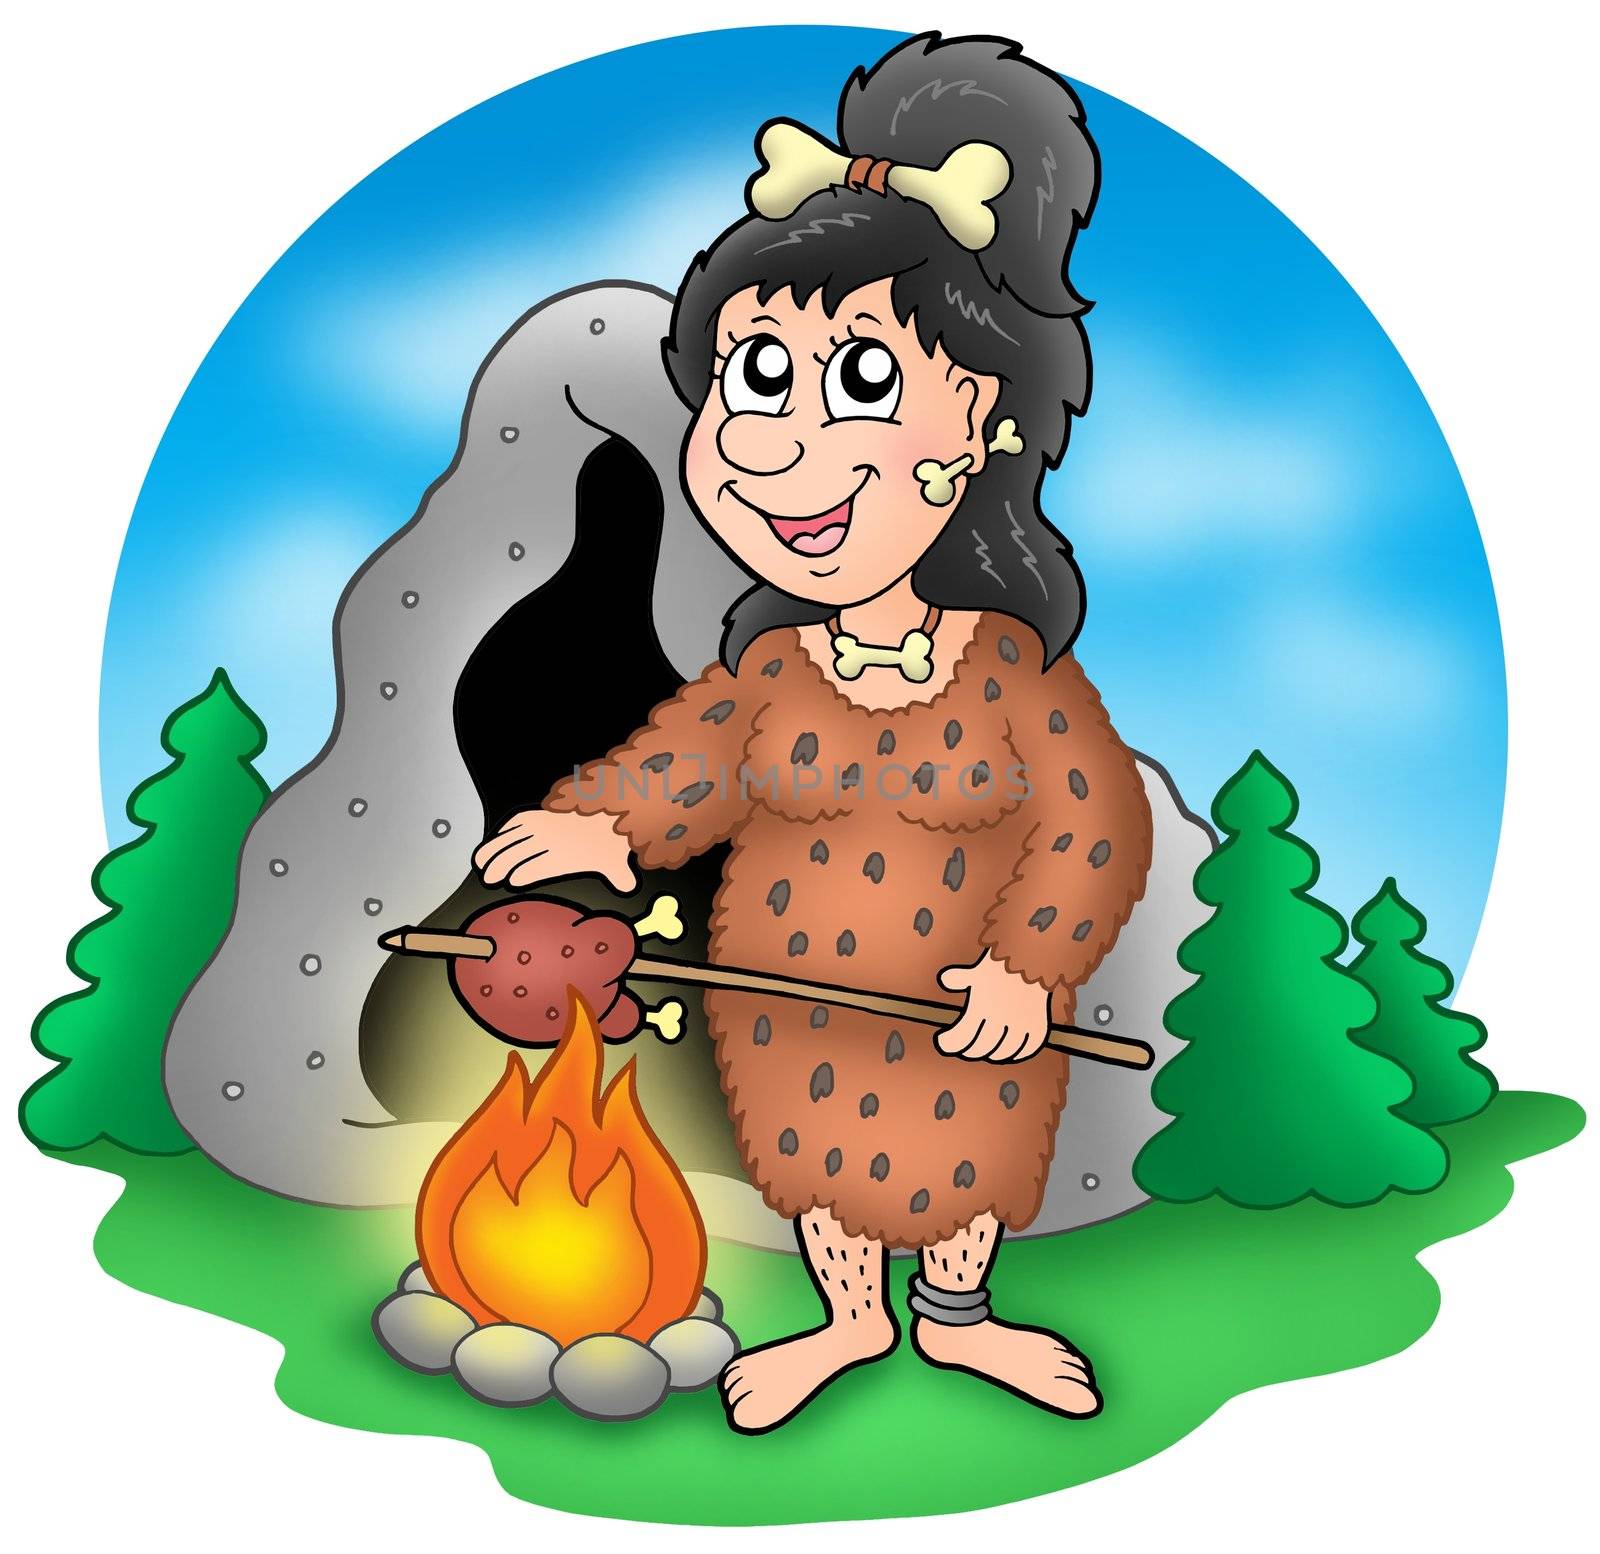 Cartoon prehistoric woman before cave by clairev